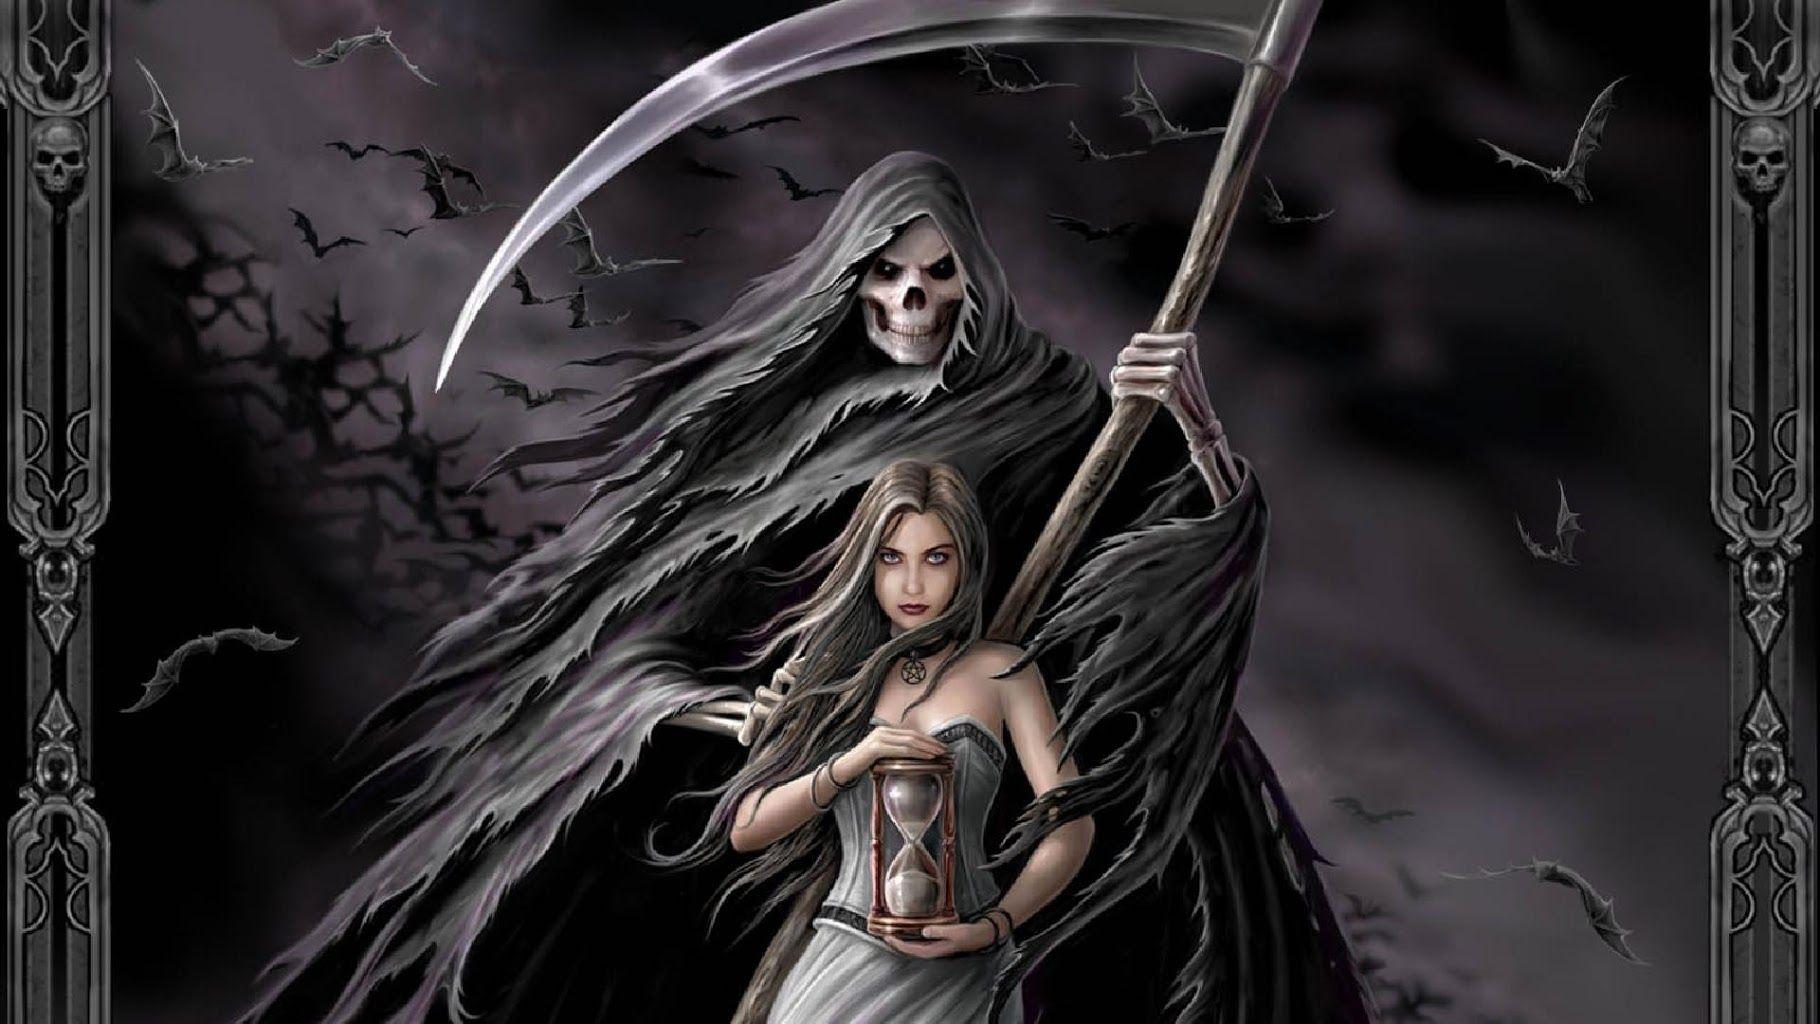 Grim Reaper Wallpaper HD download of Android version. m